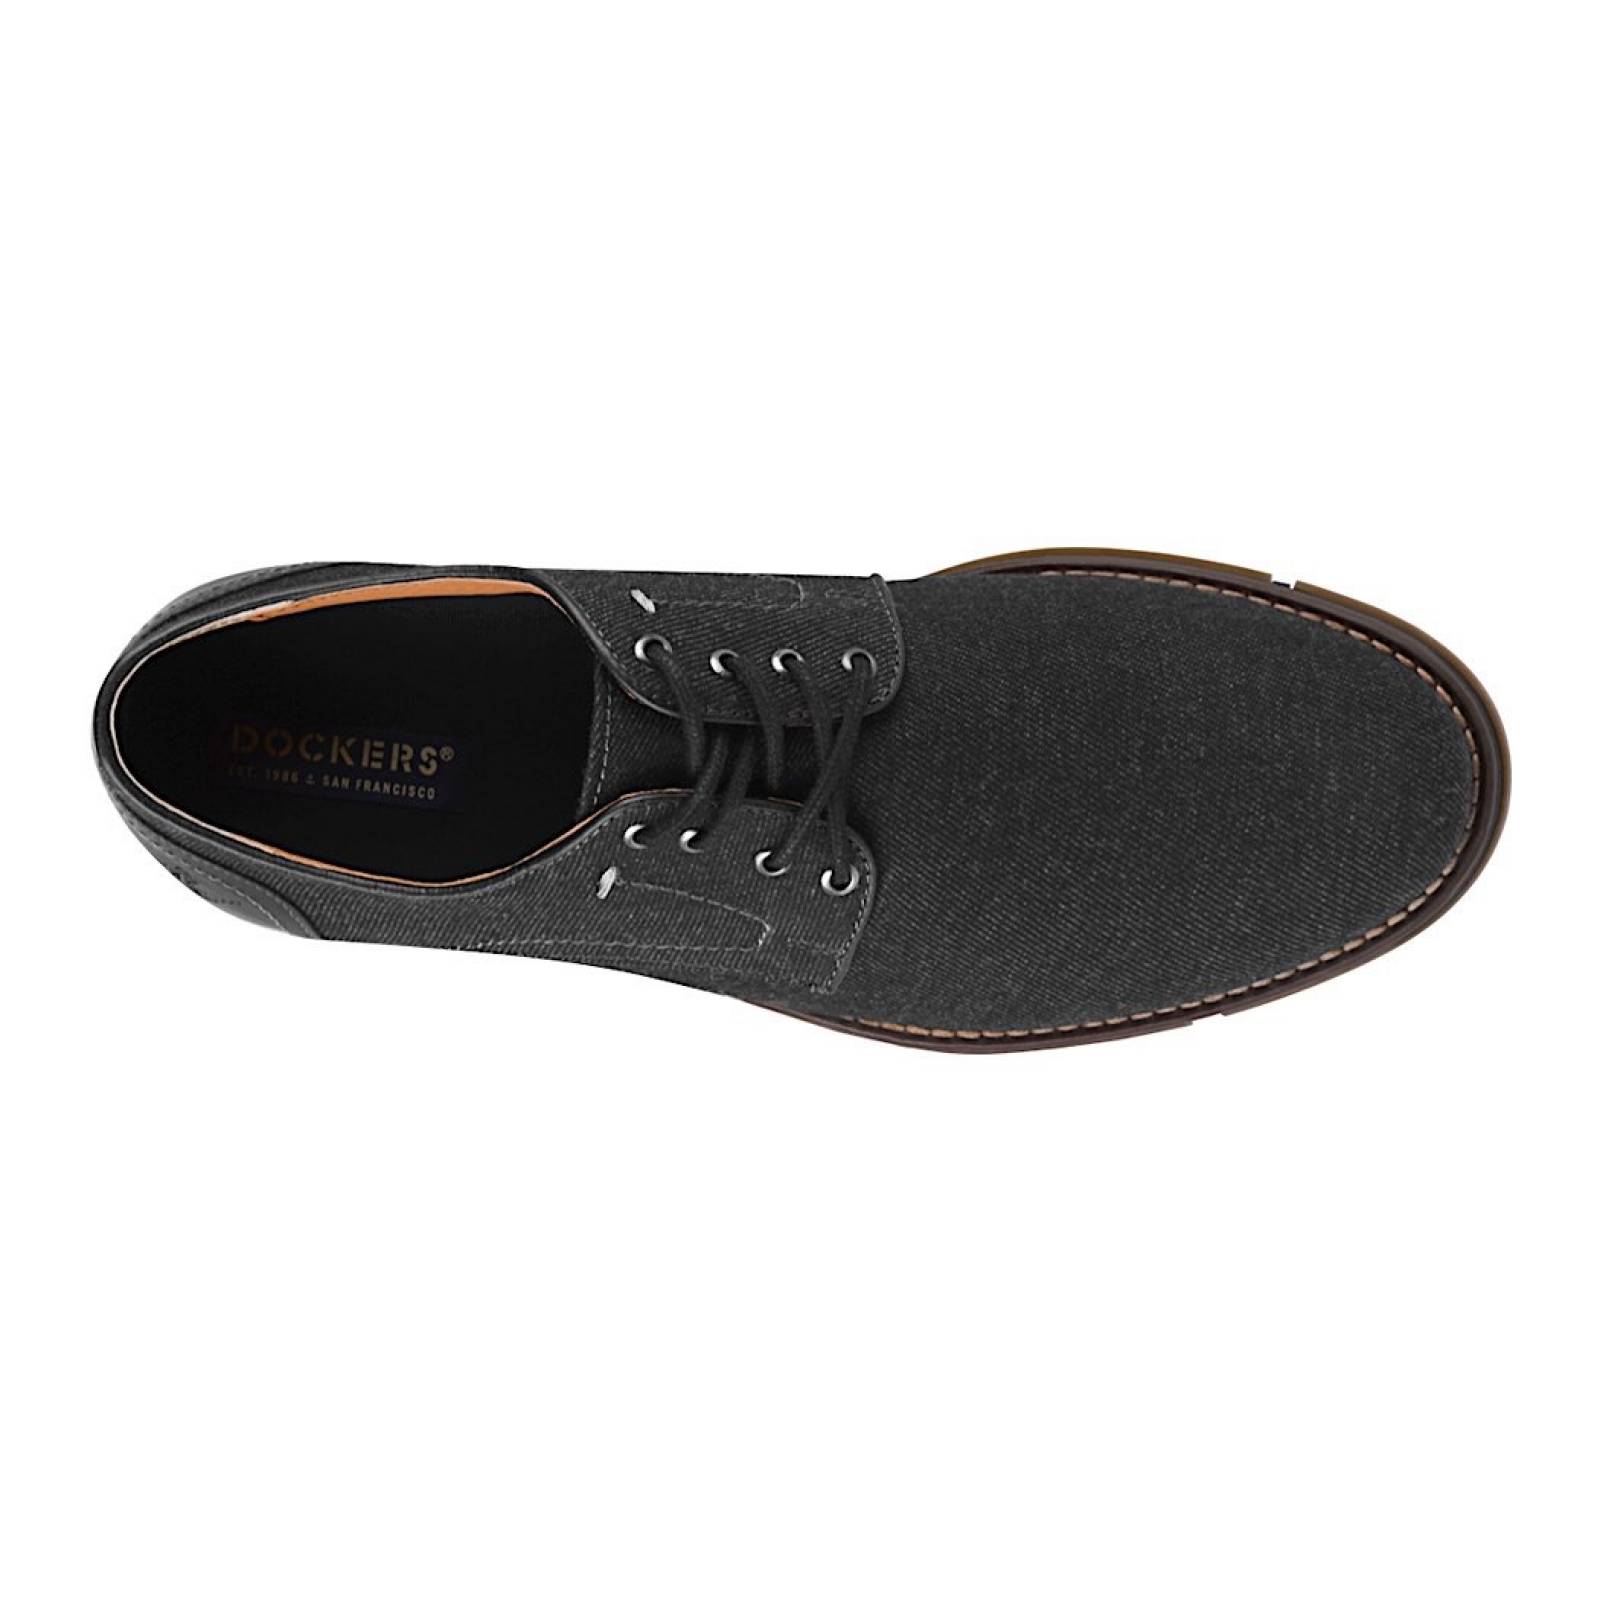 ZAPATOS CASUALES CABALLERO DOCKERS D211721 TEXTIL NEGRO